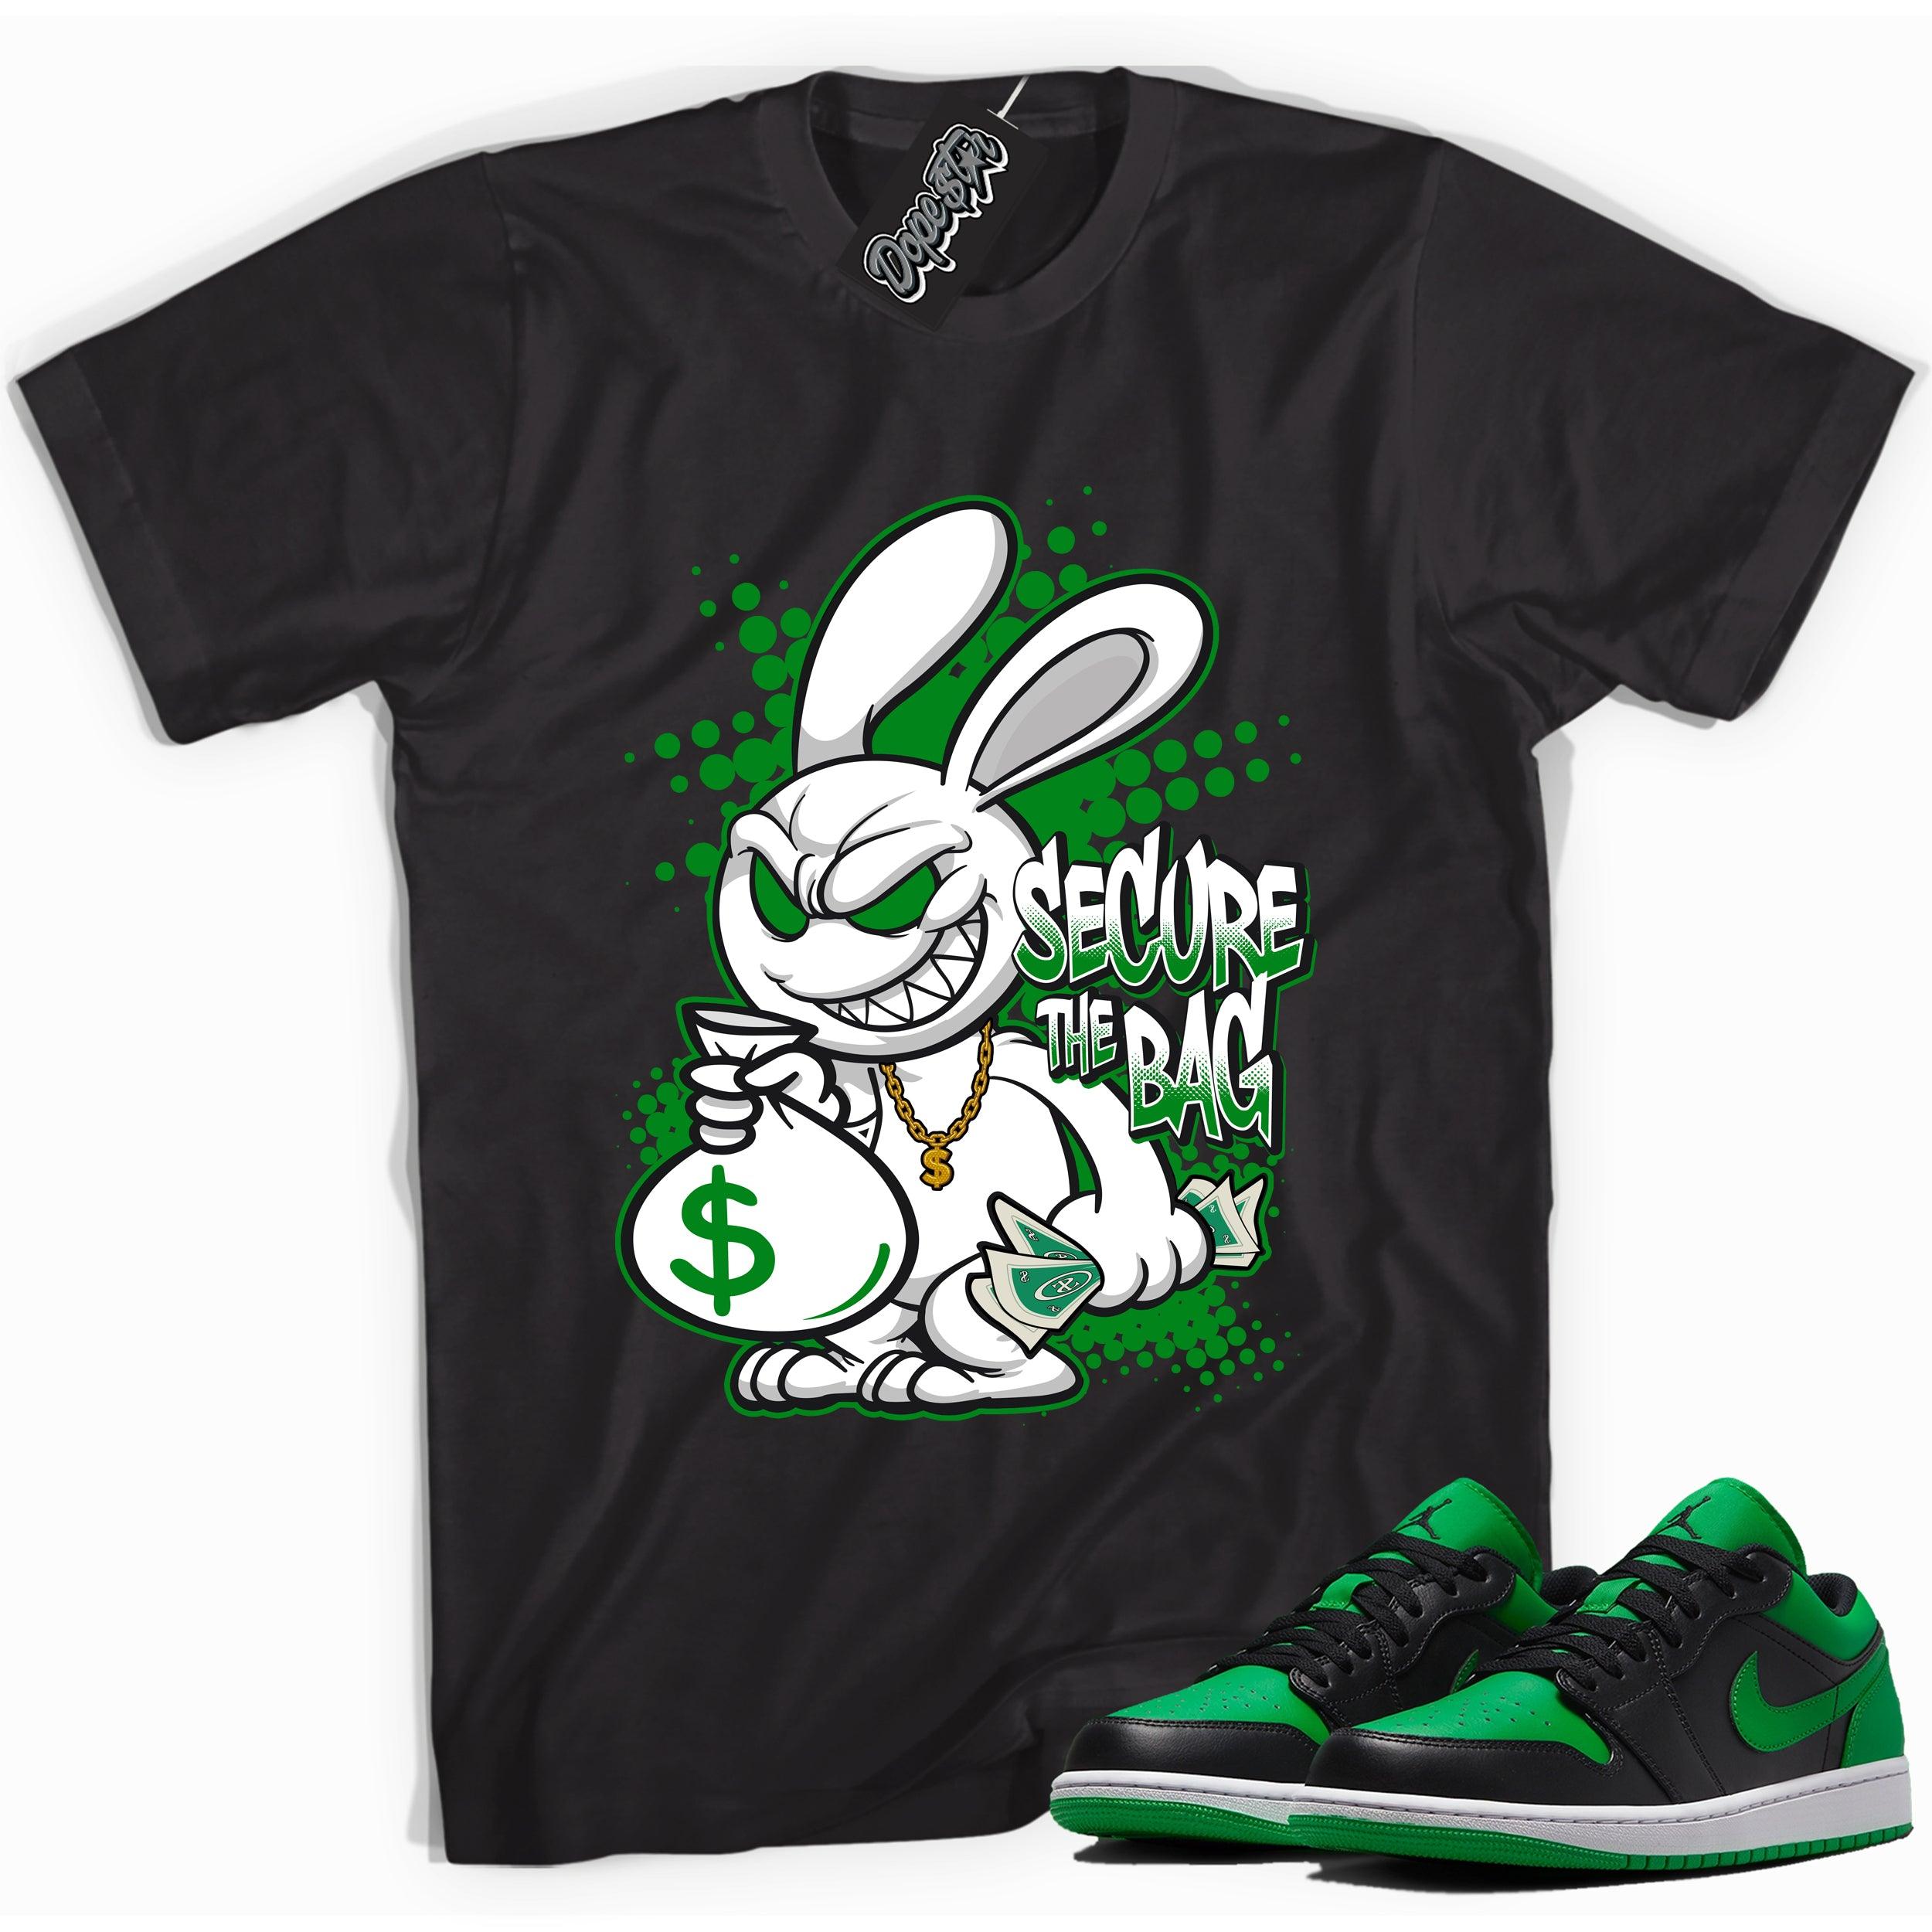 Cool black graphic tee with 'secure the bag' print, that perfectly matches Air Jordan 1 Low Lucky Green sneakers